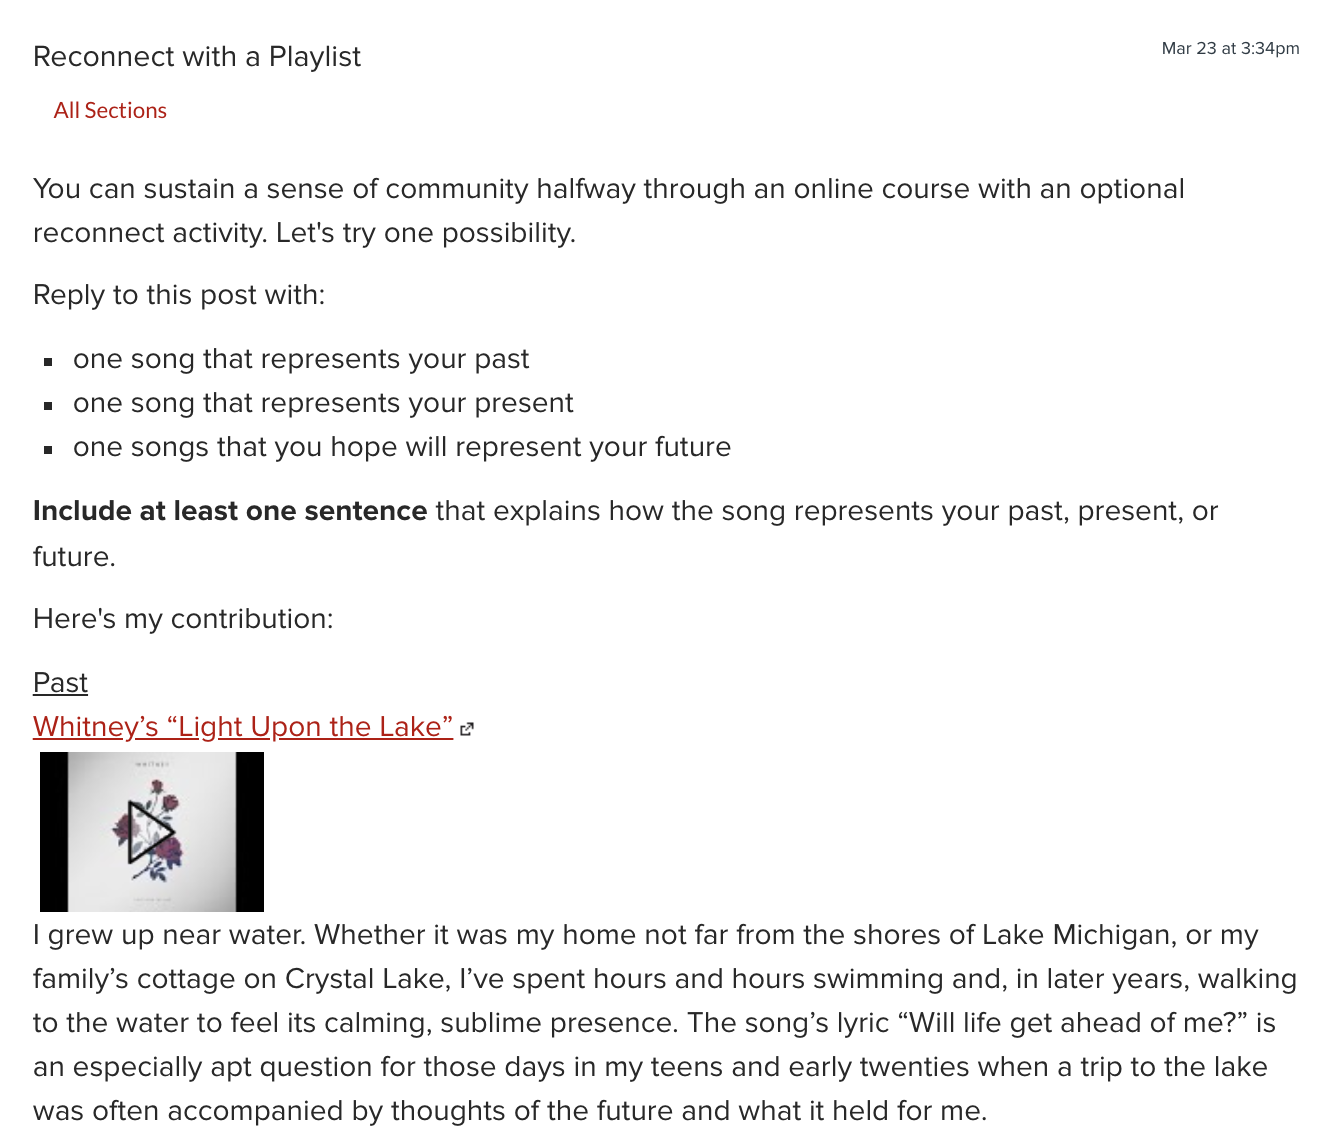 Screenshot from an example of a playlist. The instructions are "to reply to the discussion post with one song that represents your past; one song that represents your present; and one songs that you hope will represent your future. Include at least one sentence that explains how the song represents your past, present, or future."